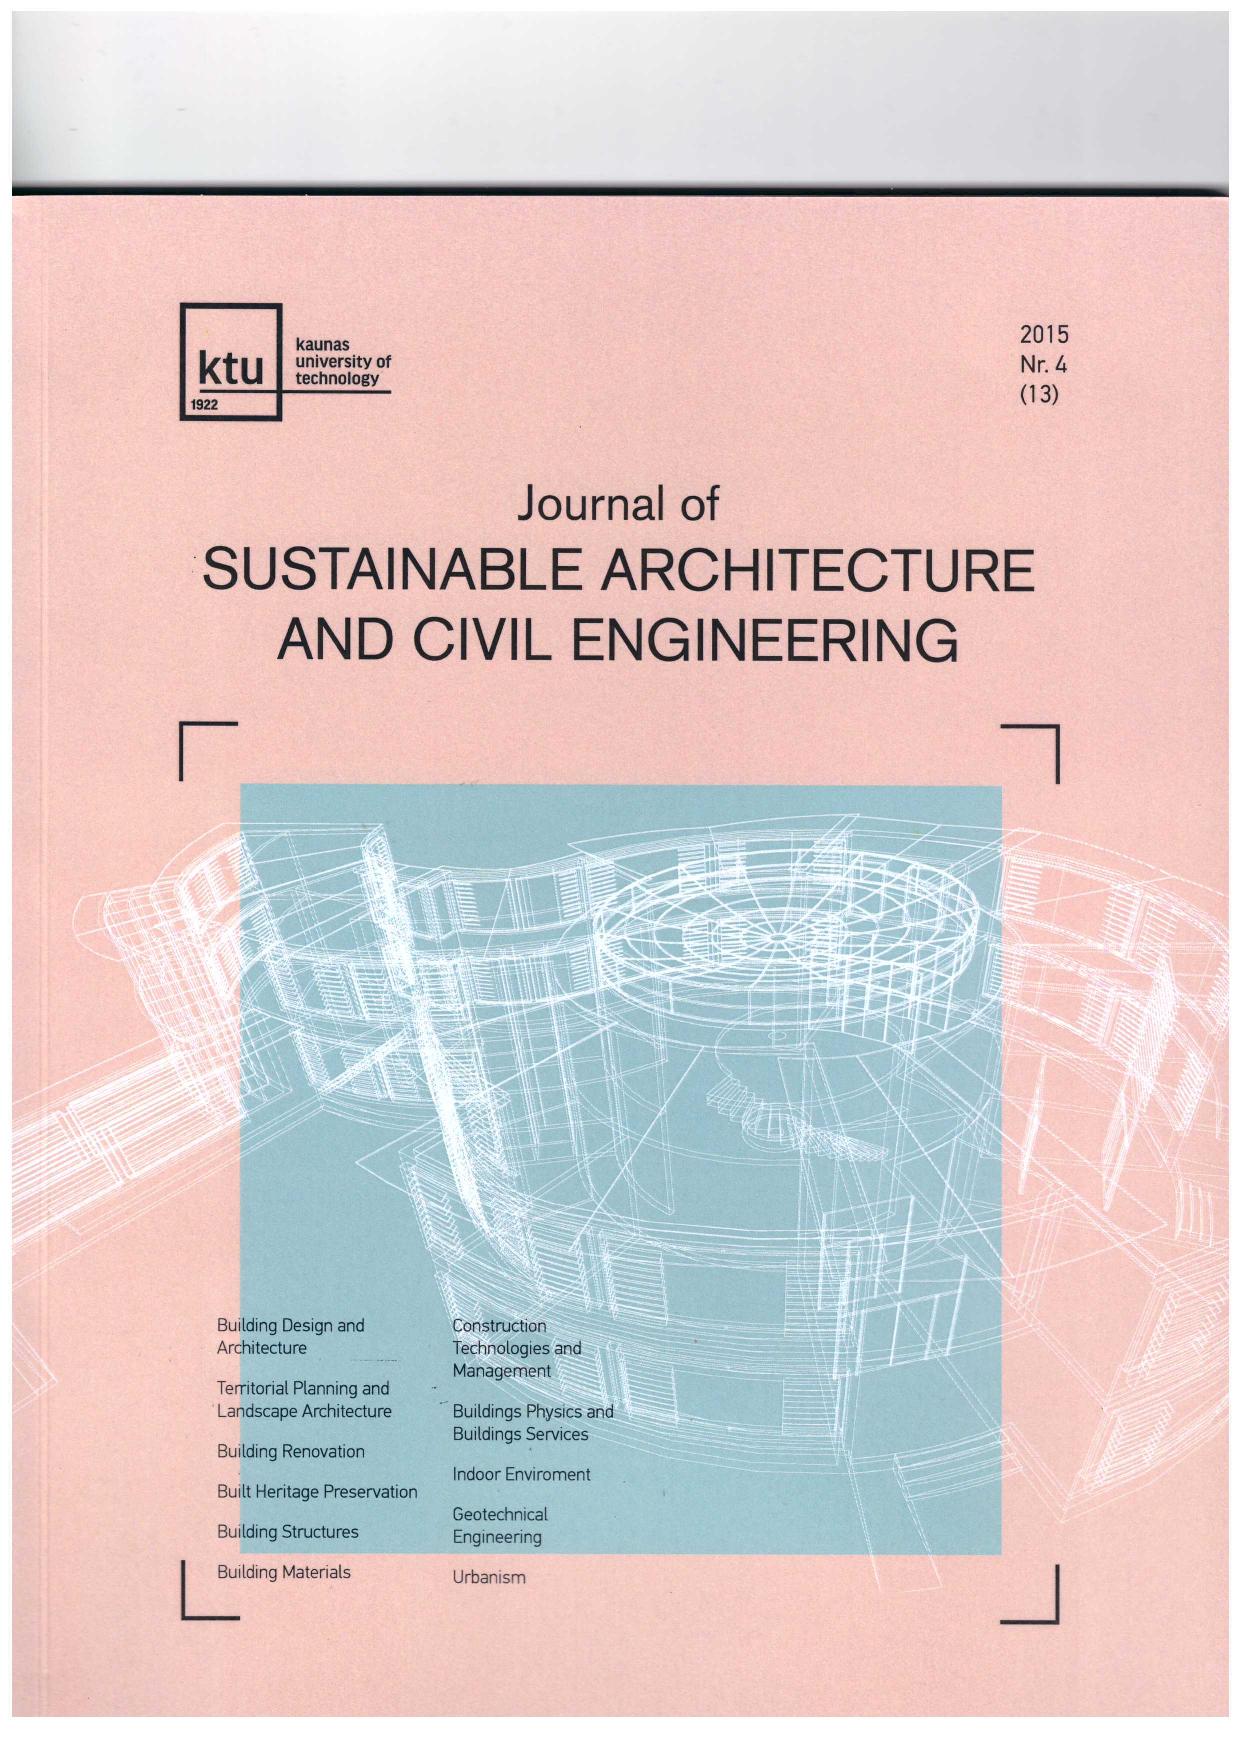 The Comparison of a Numerical and Empirical Calculation of Thermal Transmittance of Ventilated Facade with Different Heat-Conductive Connections